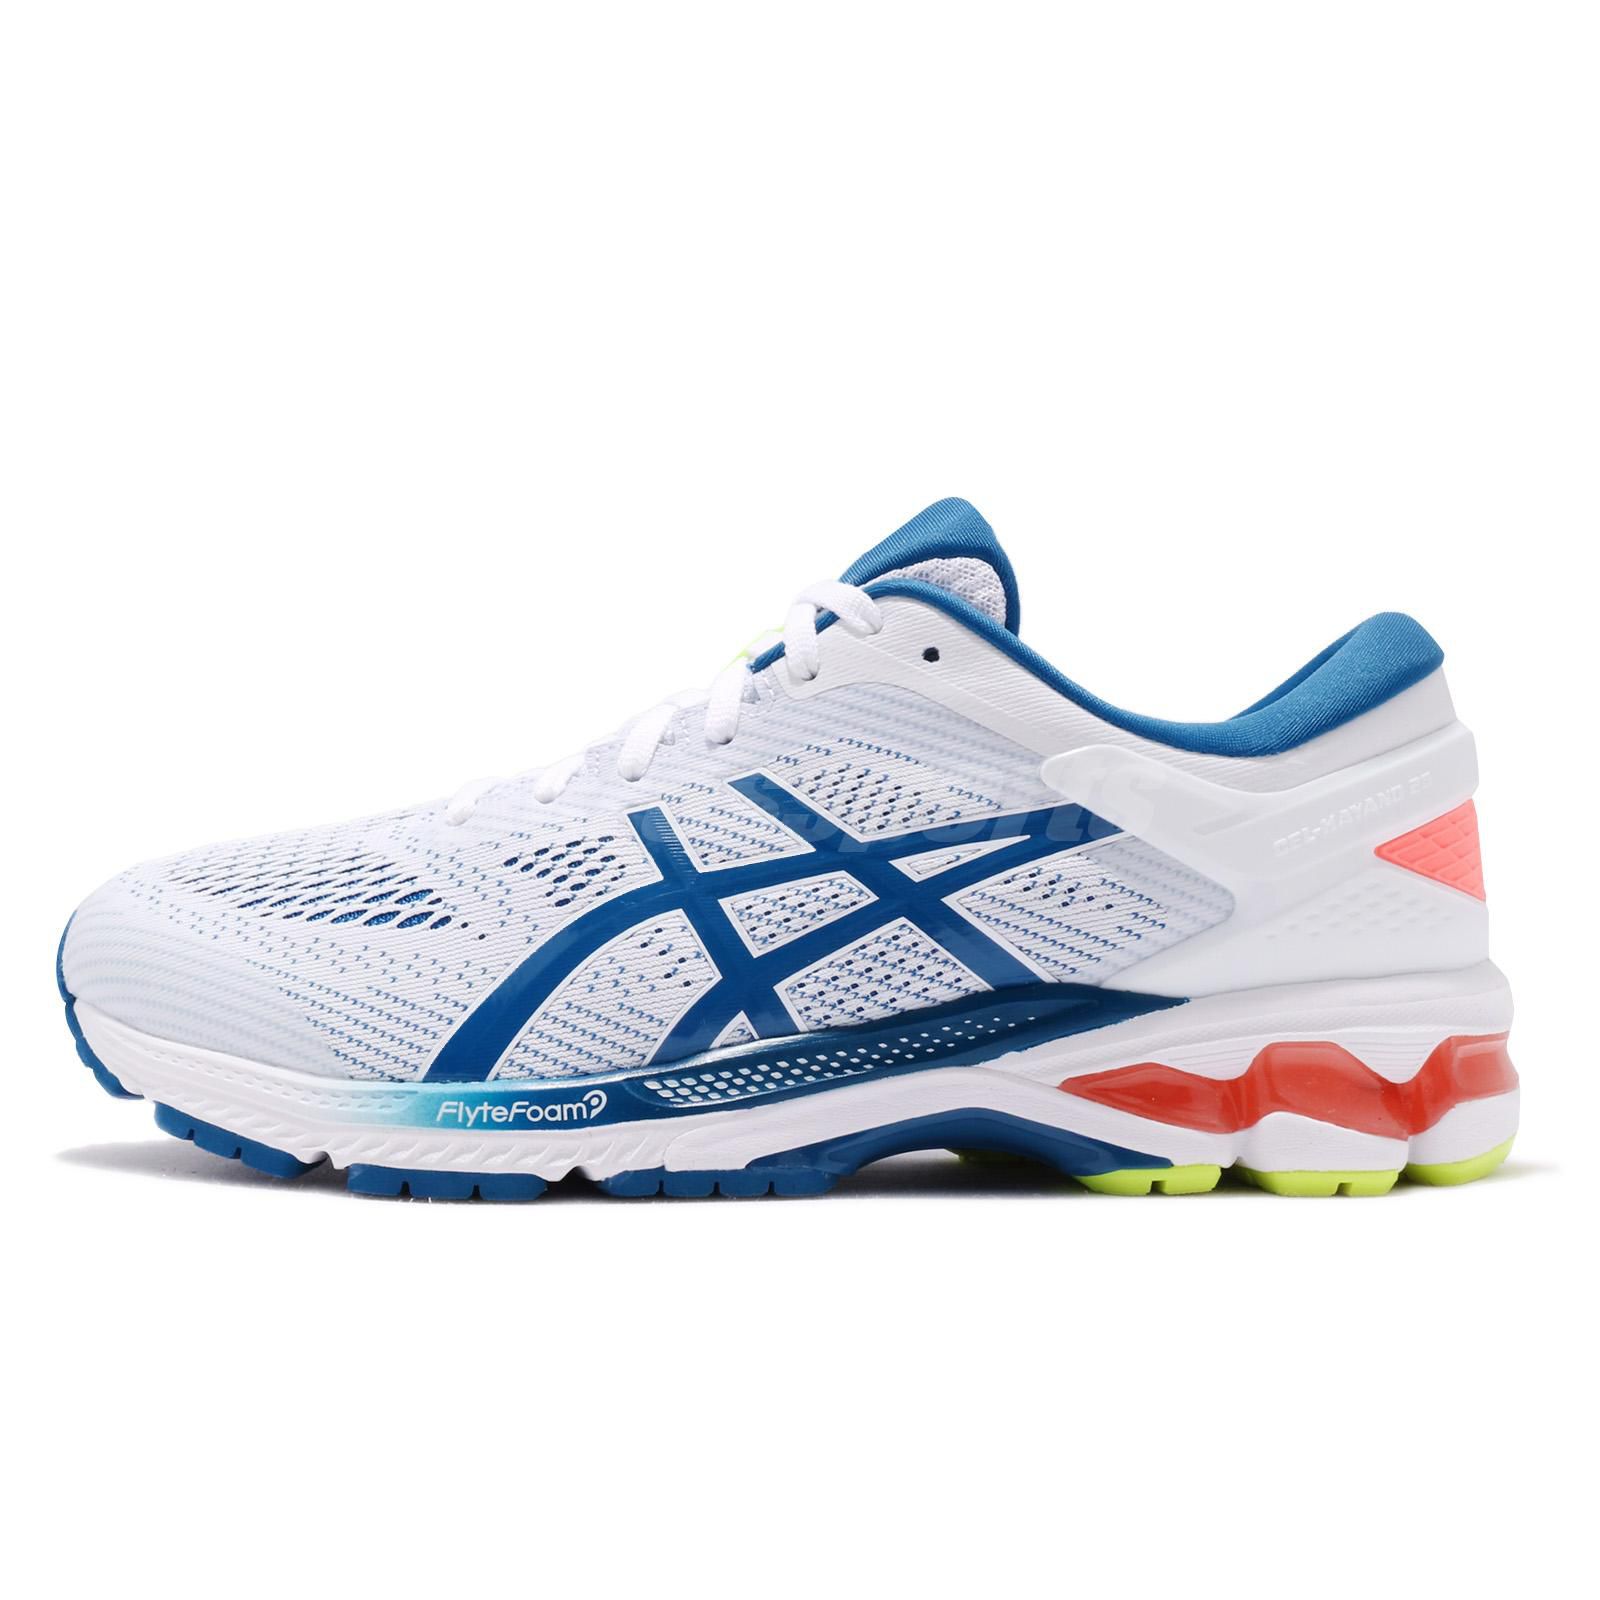 Asics Gel Kayano 26 White Running Shoes - Buy Asics Gel Kayano 26 White  Running Shoes Online at Best Prices in India on Snapdeal